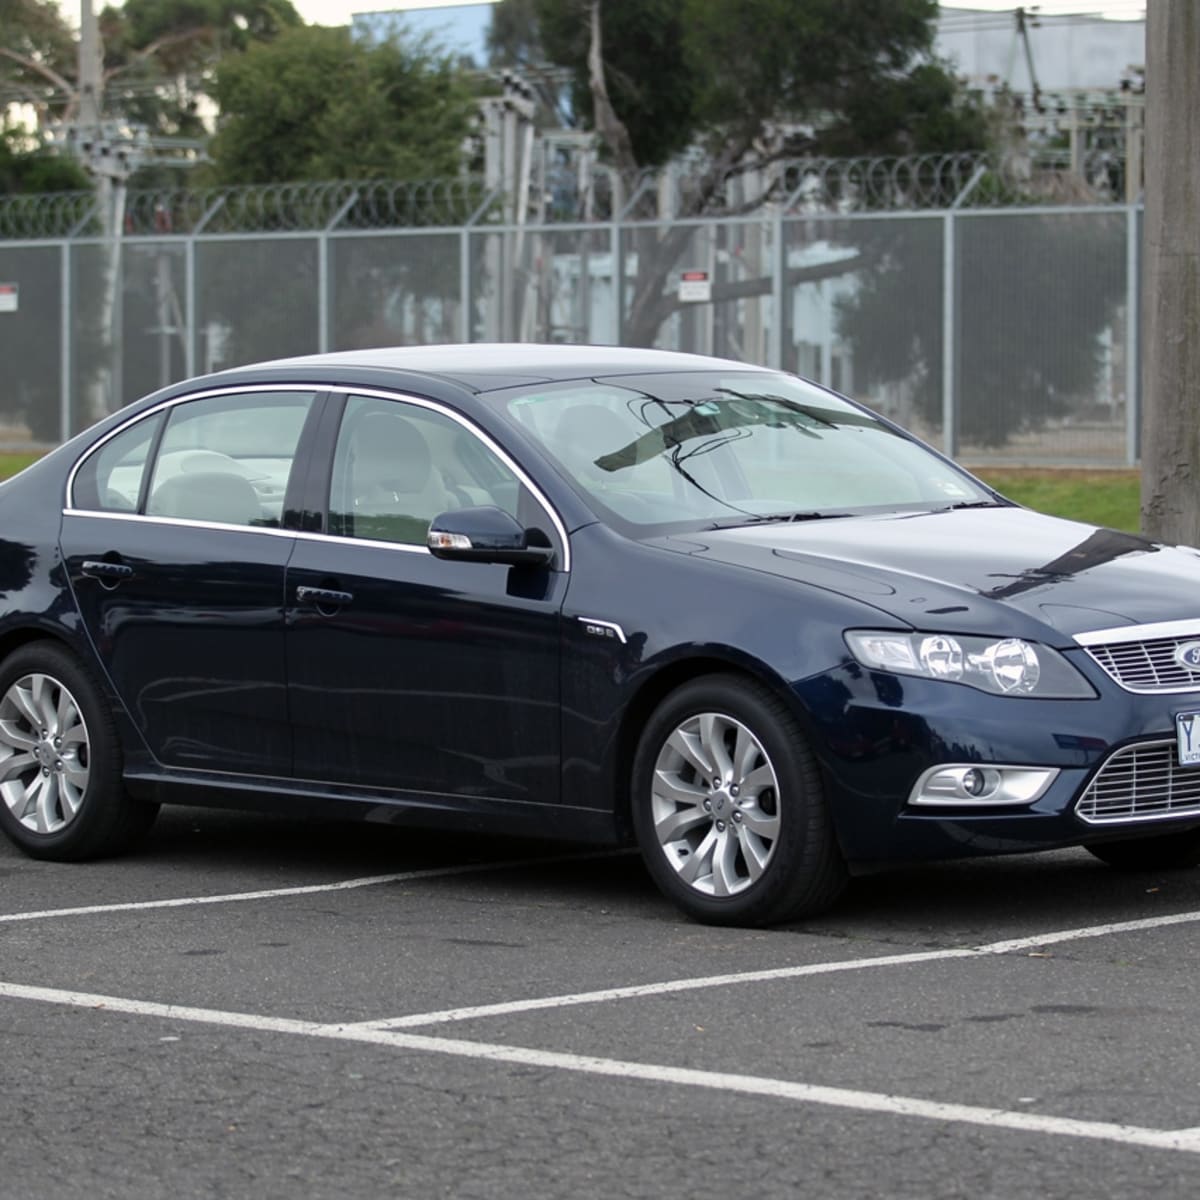 Ford Falcon Ecolpi Review Caradvice